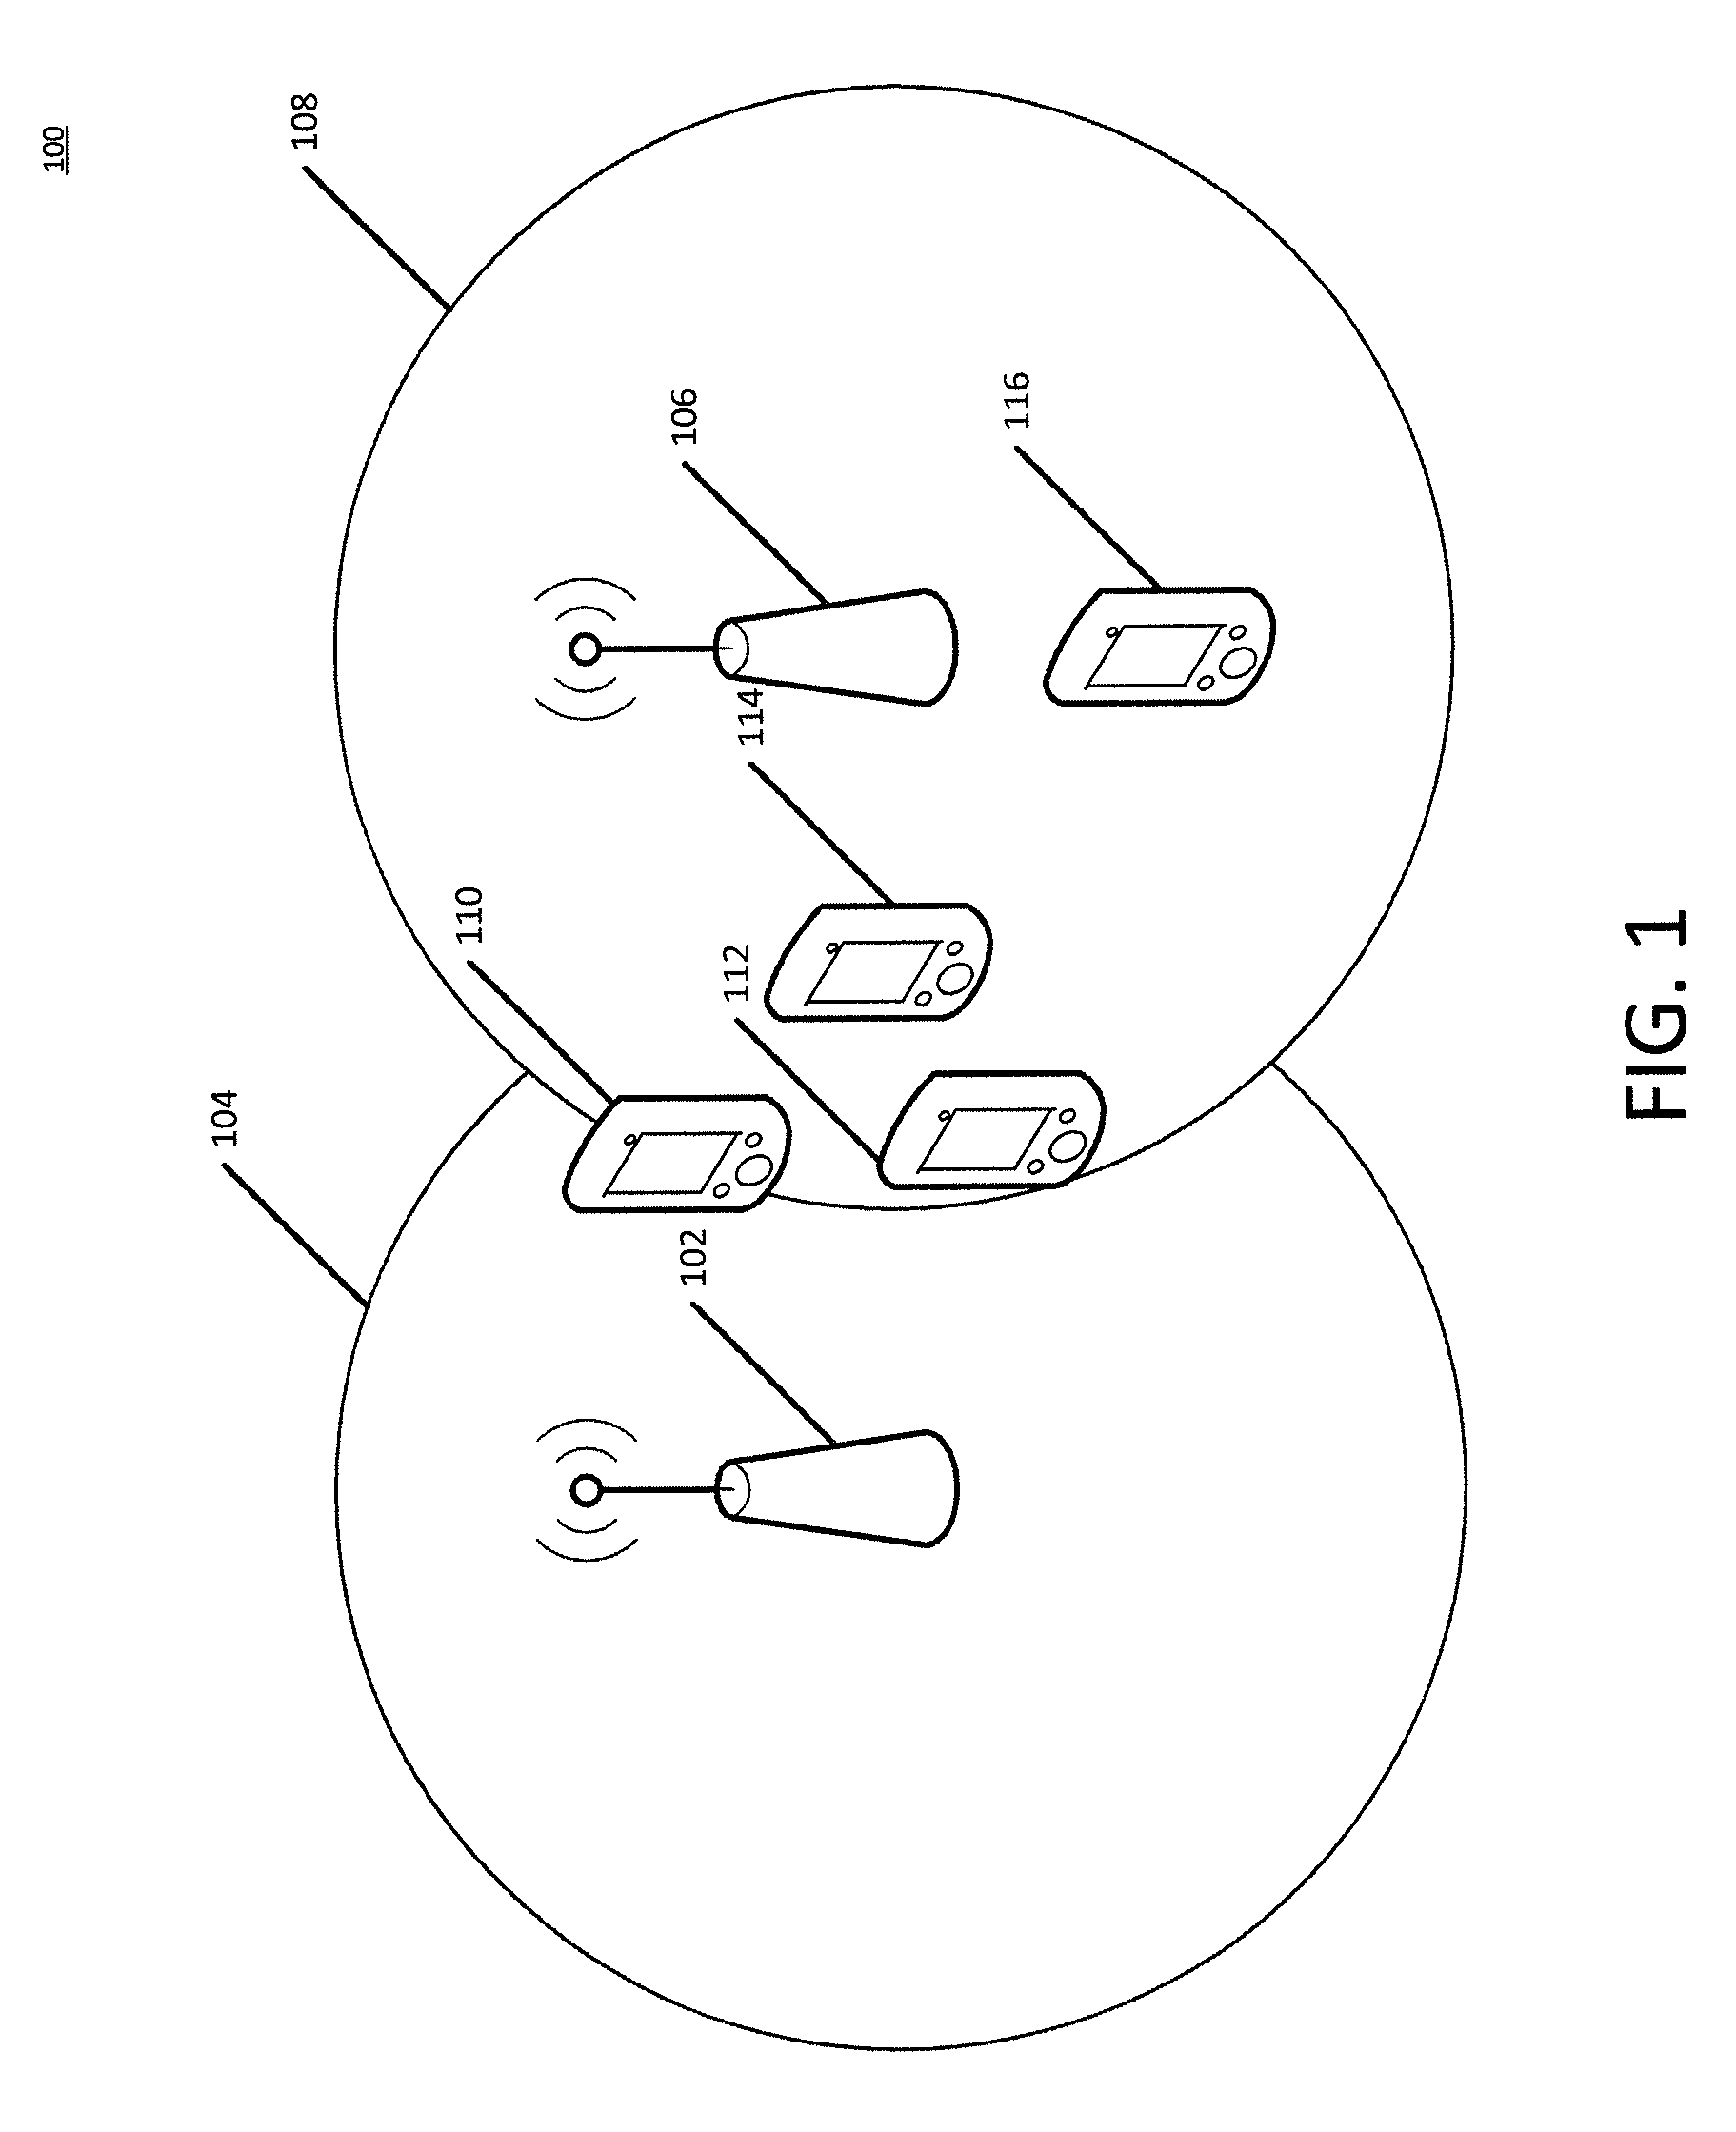 Method and apparatus for providing improved detection of overlapping networks